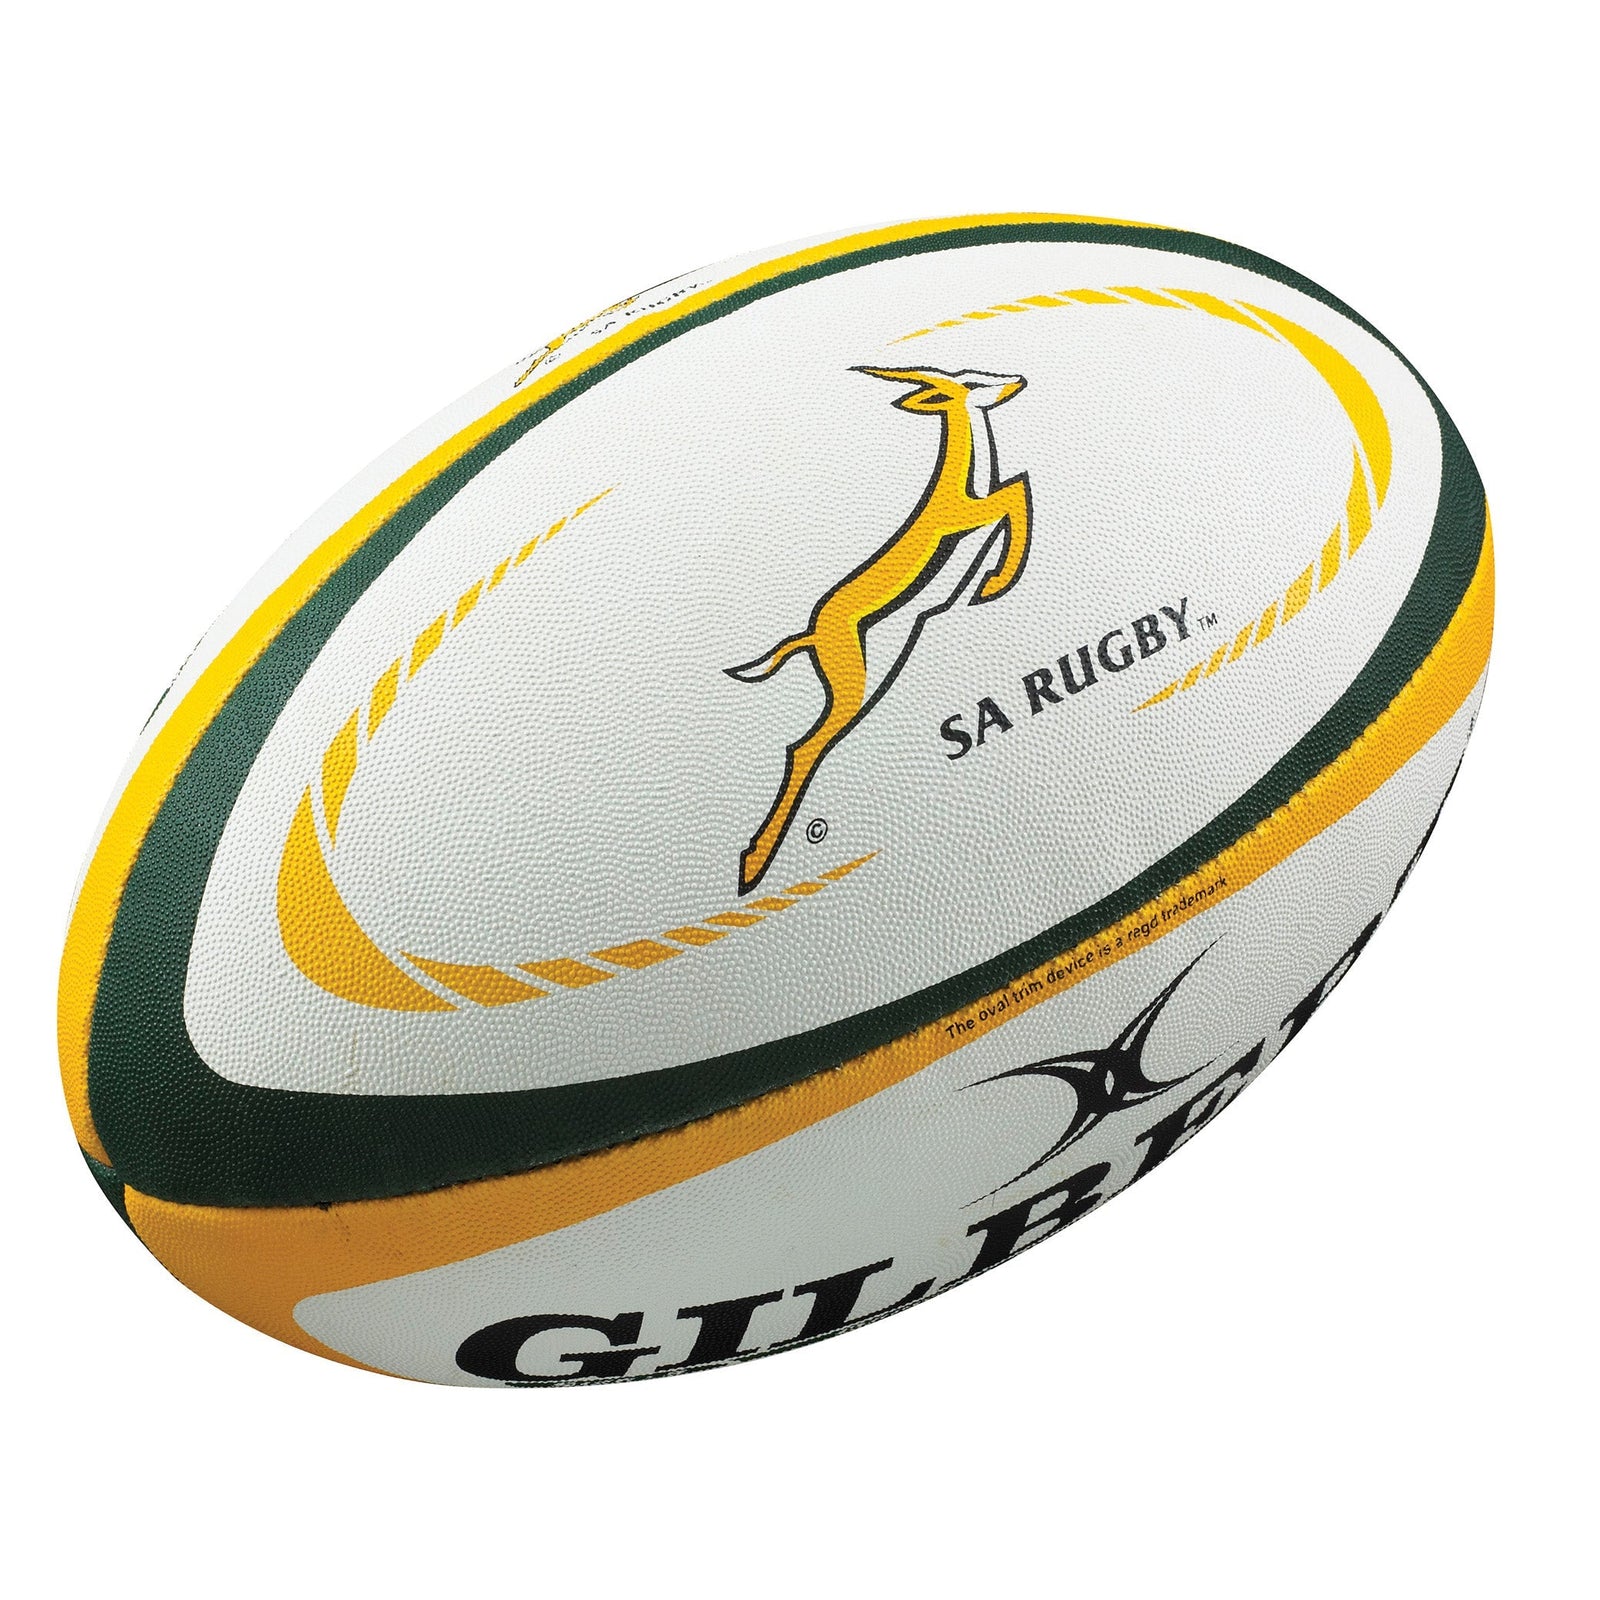 South Africa Springboks Rugby Gear and Apparel